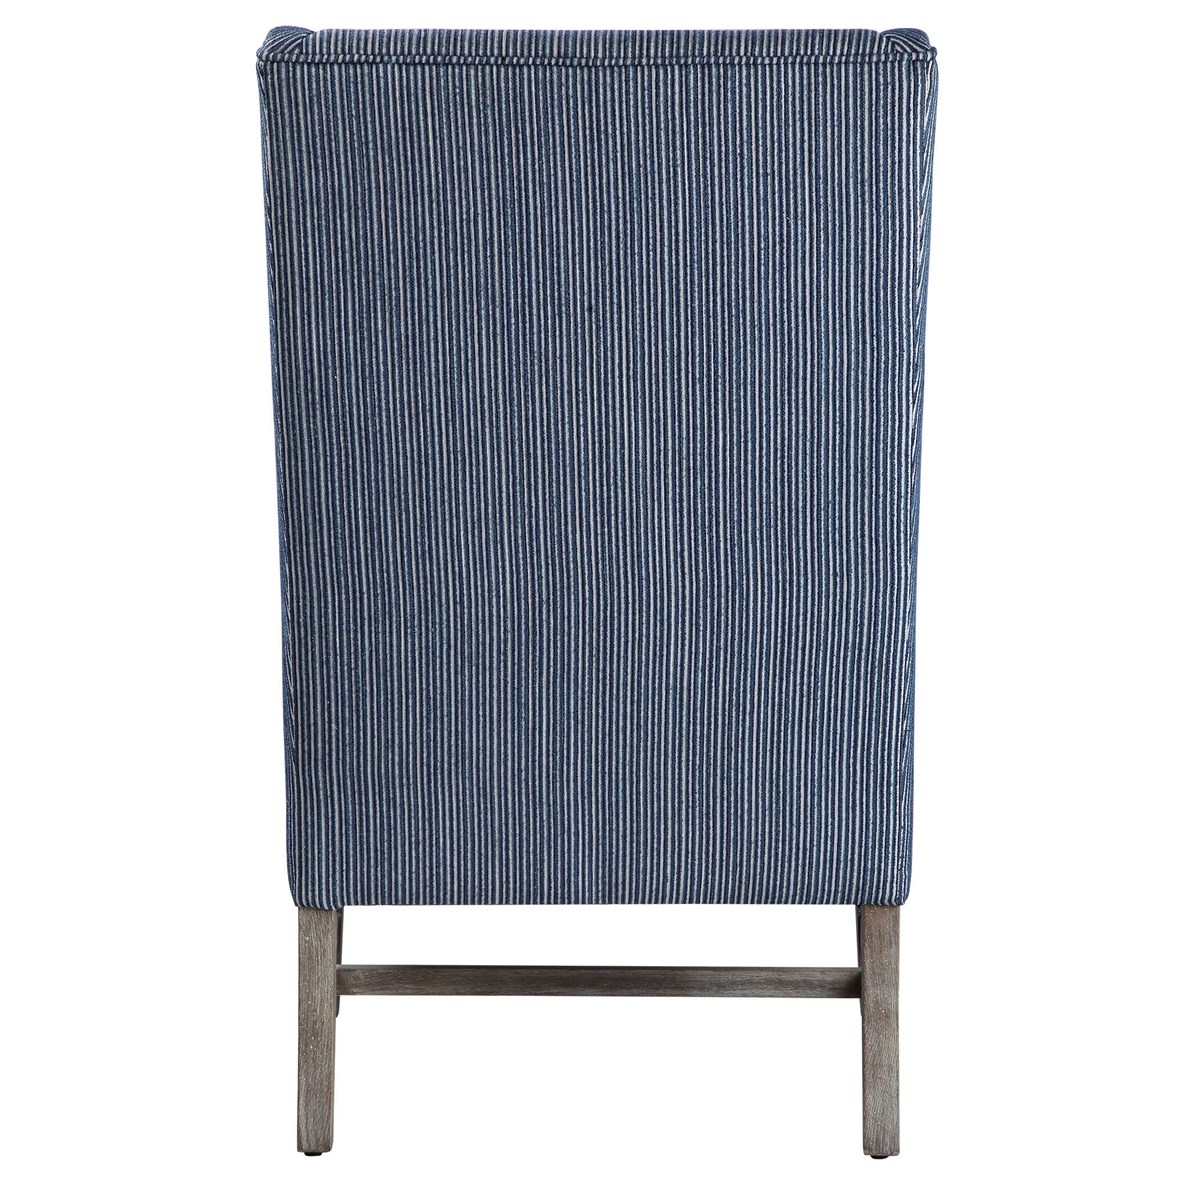 GALIOT ACCENT CHAIR - Image 3